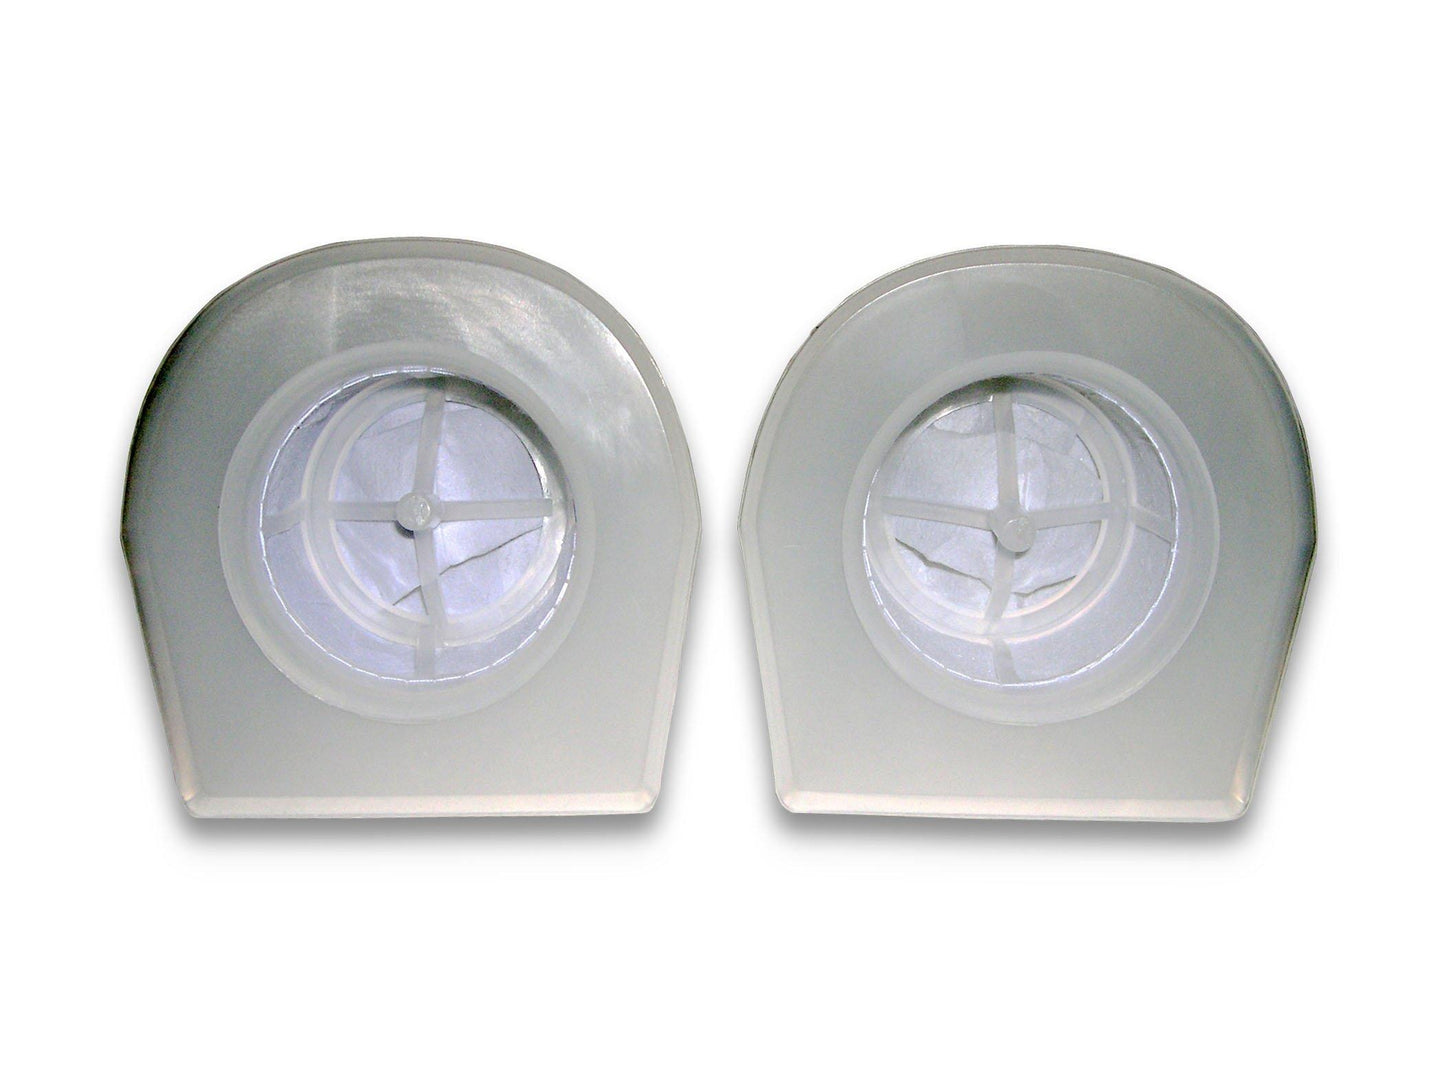 Filter with Adapter (2 Pack)